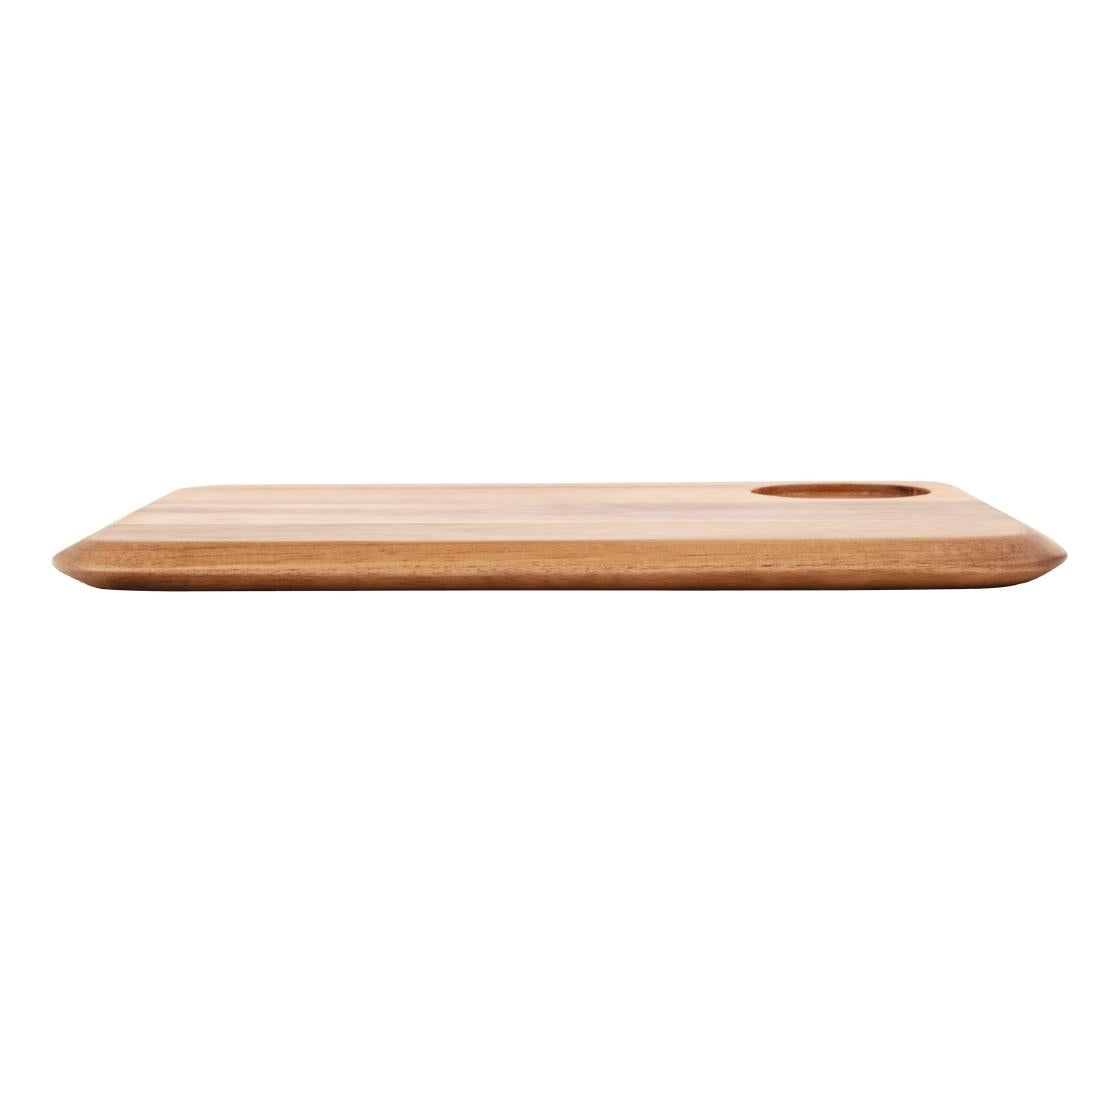 Rounded Acacia Wooden Serving Board